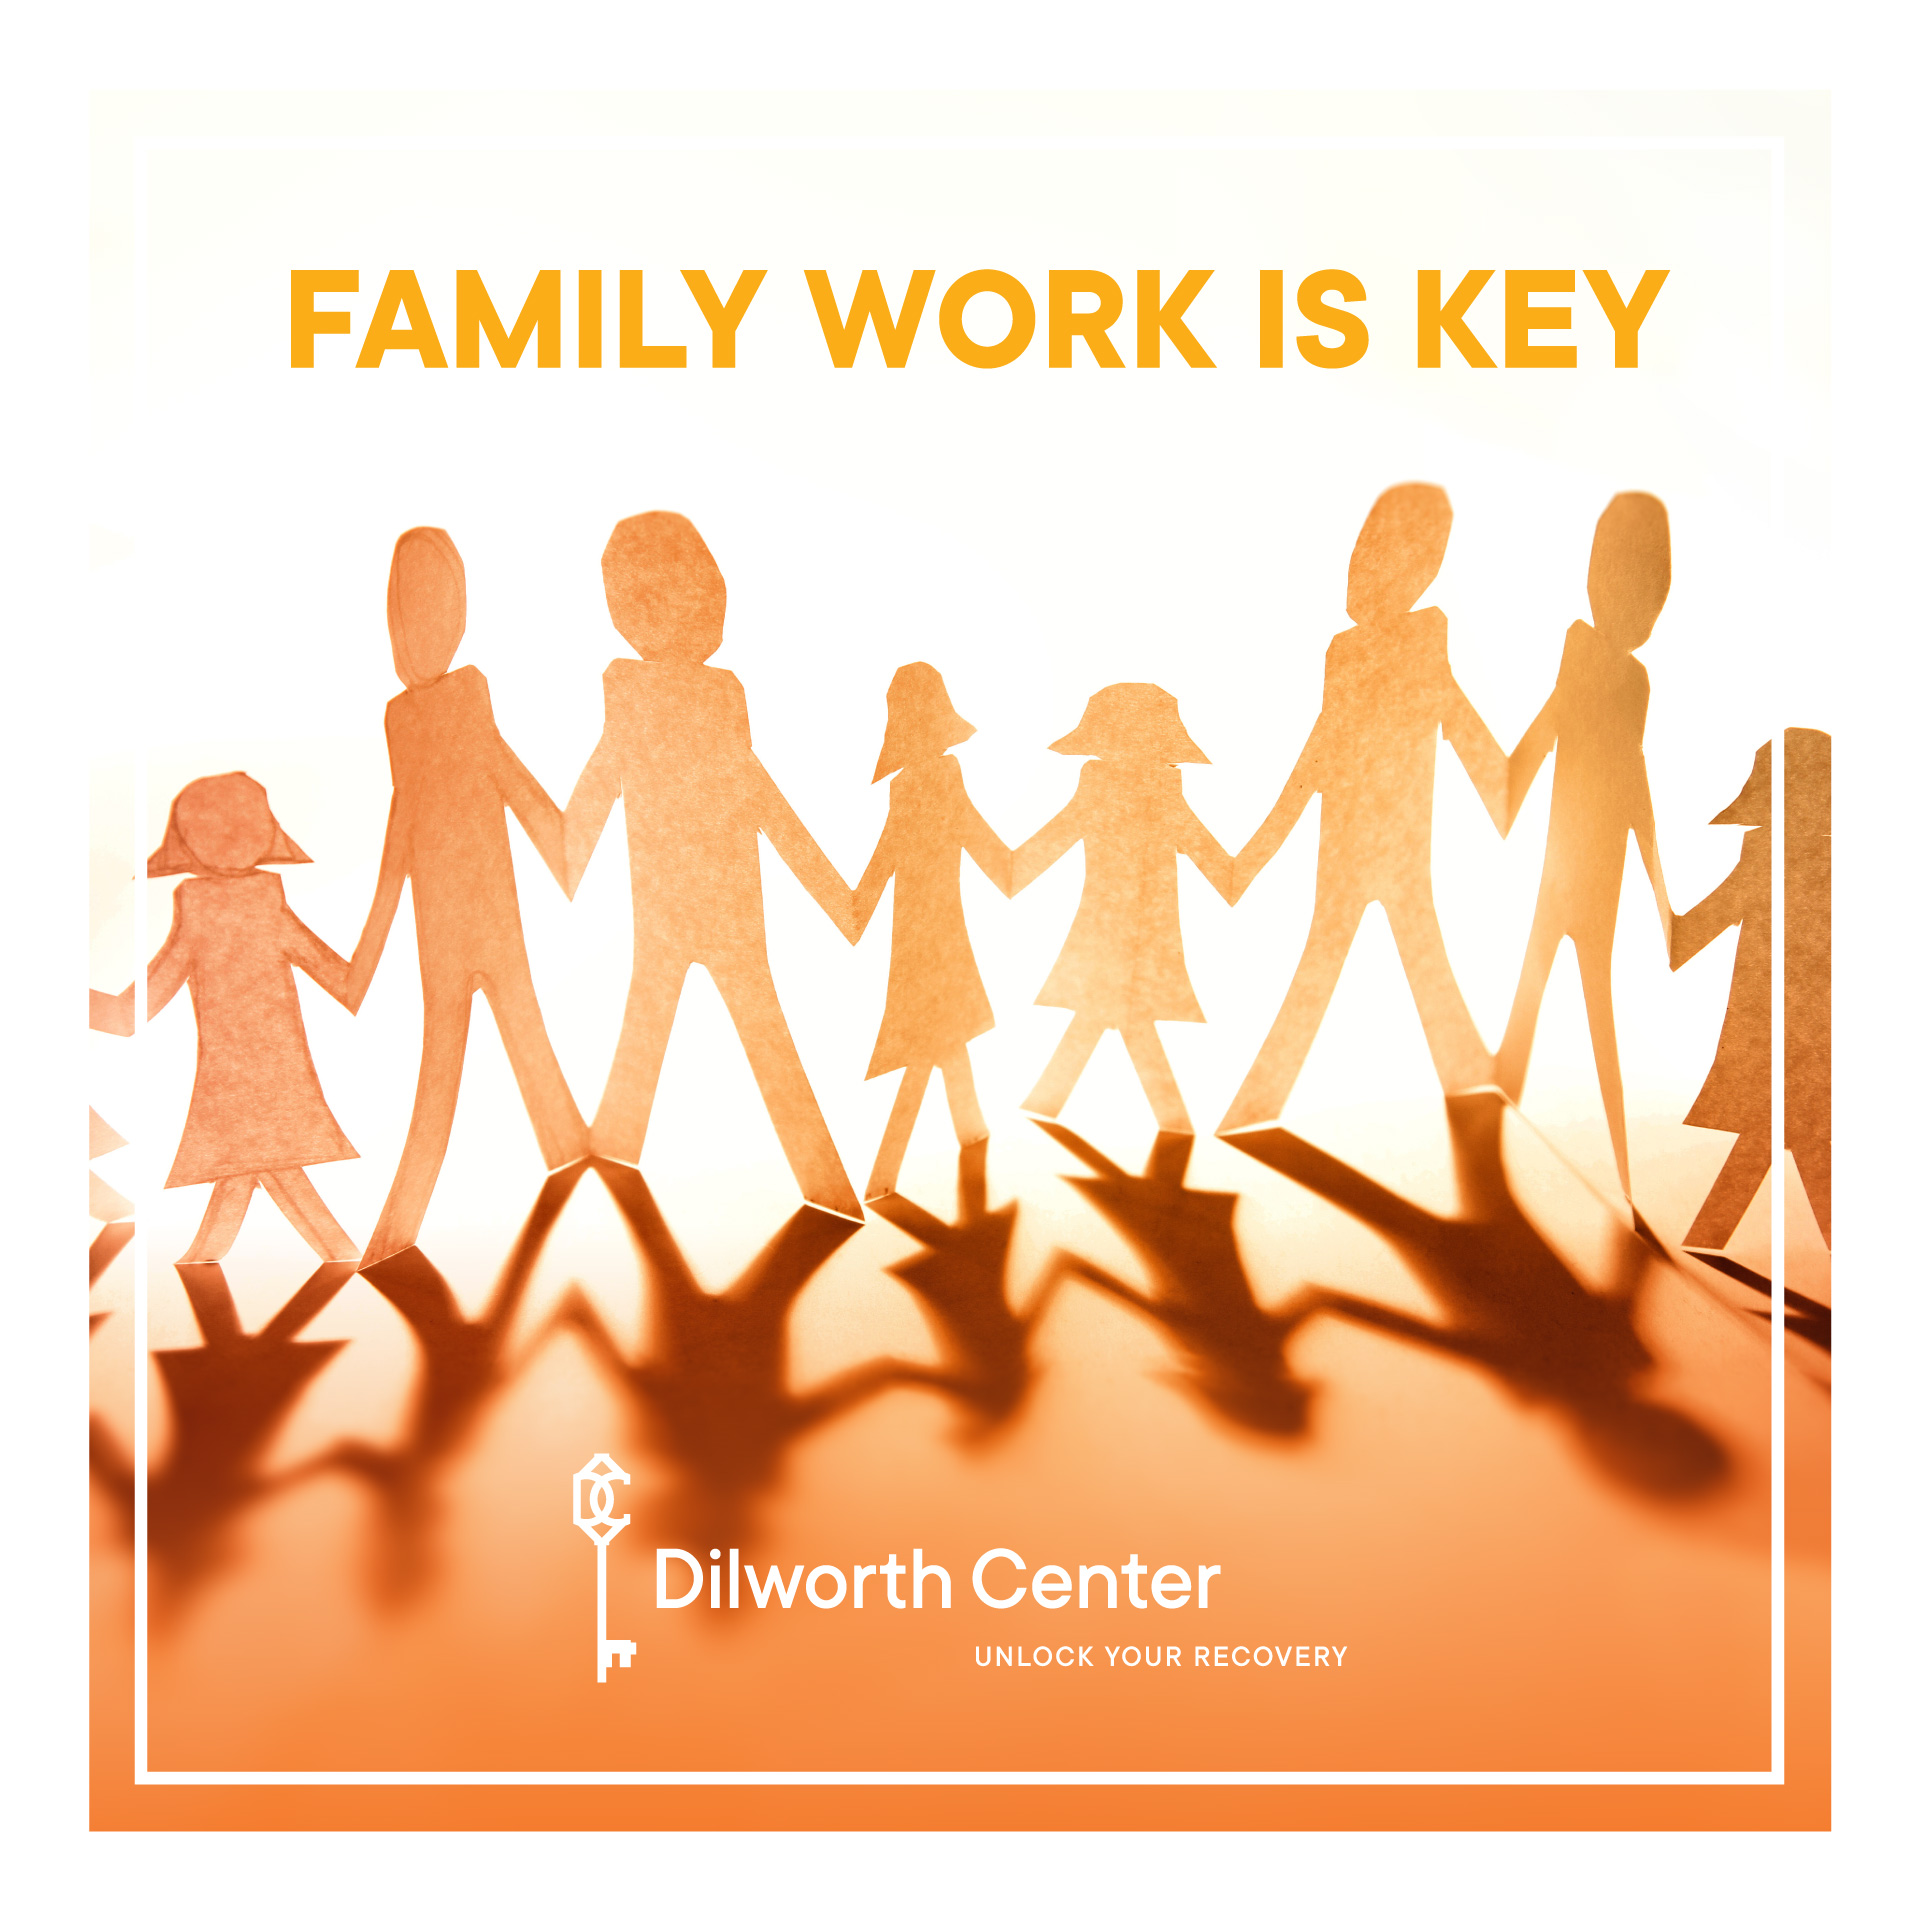 Family work is key to recovery